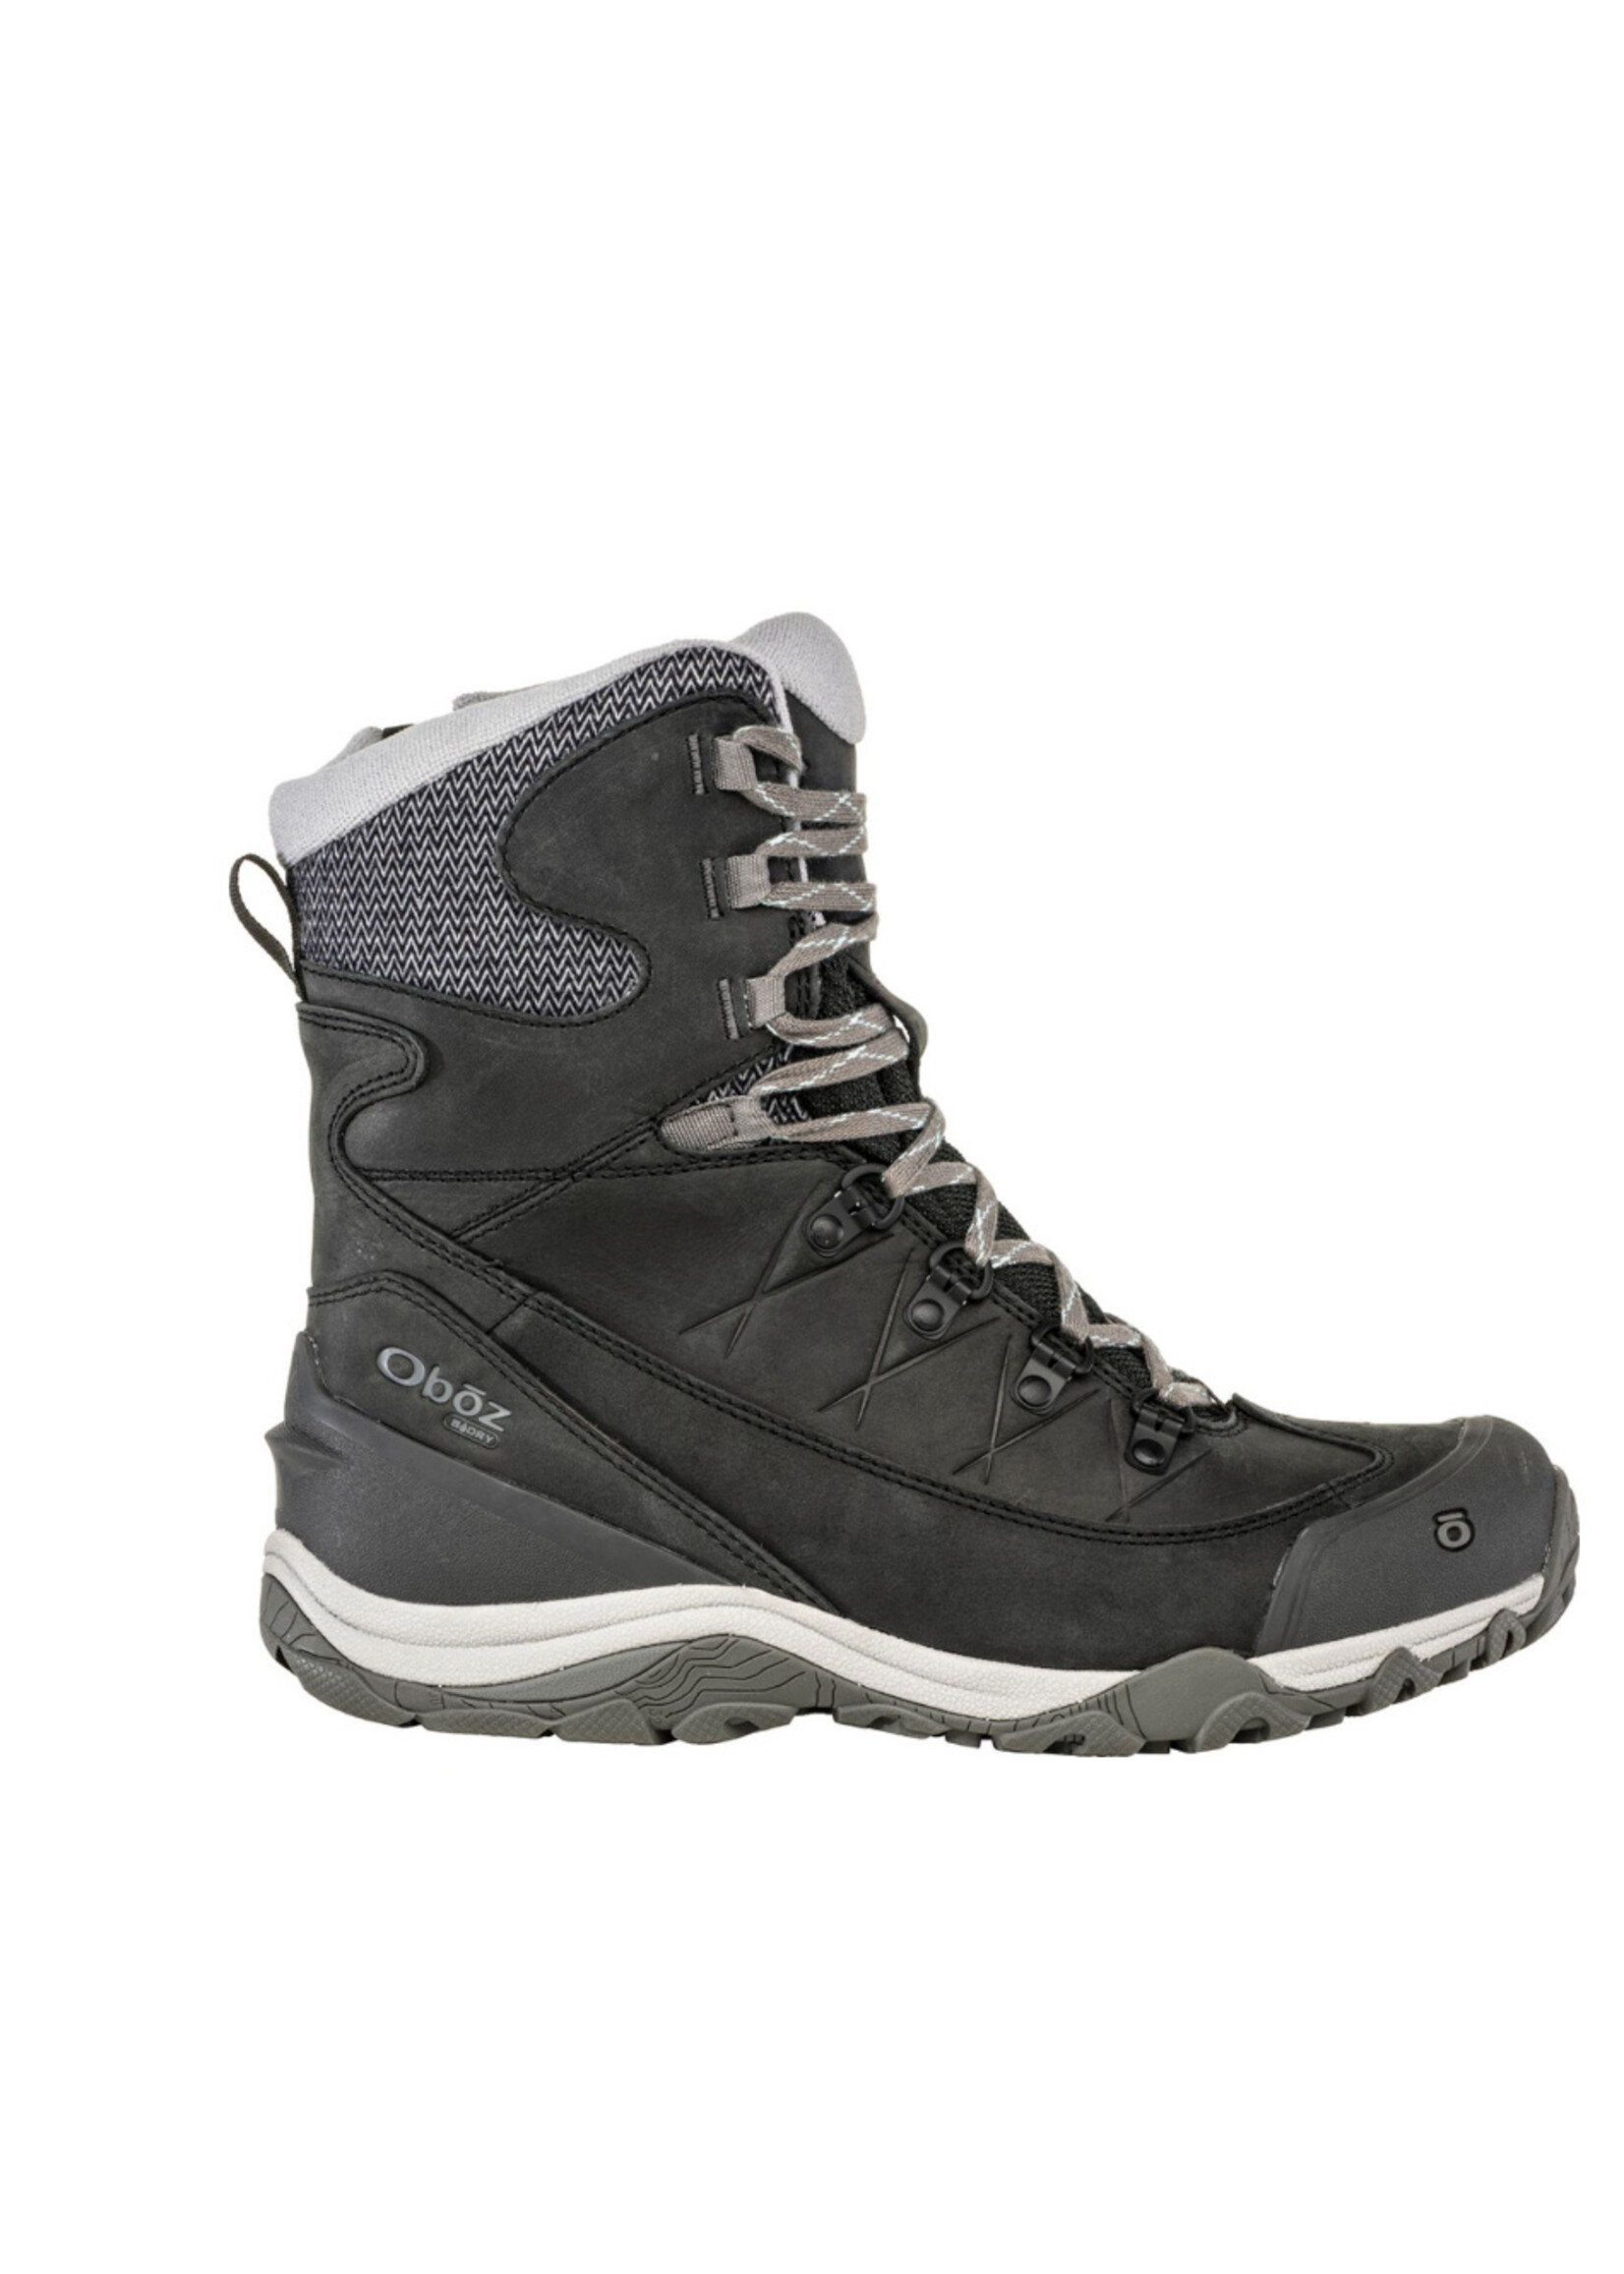 Oboz Footwear Ousel Mid Insulated B-DRY WMN